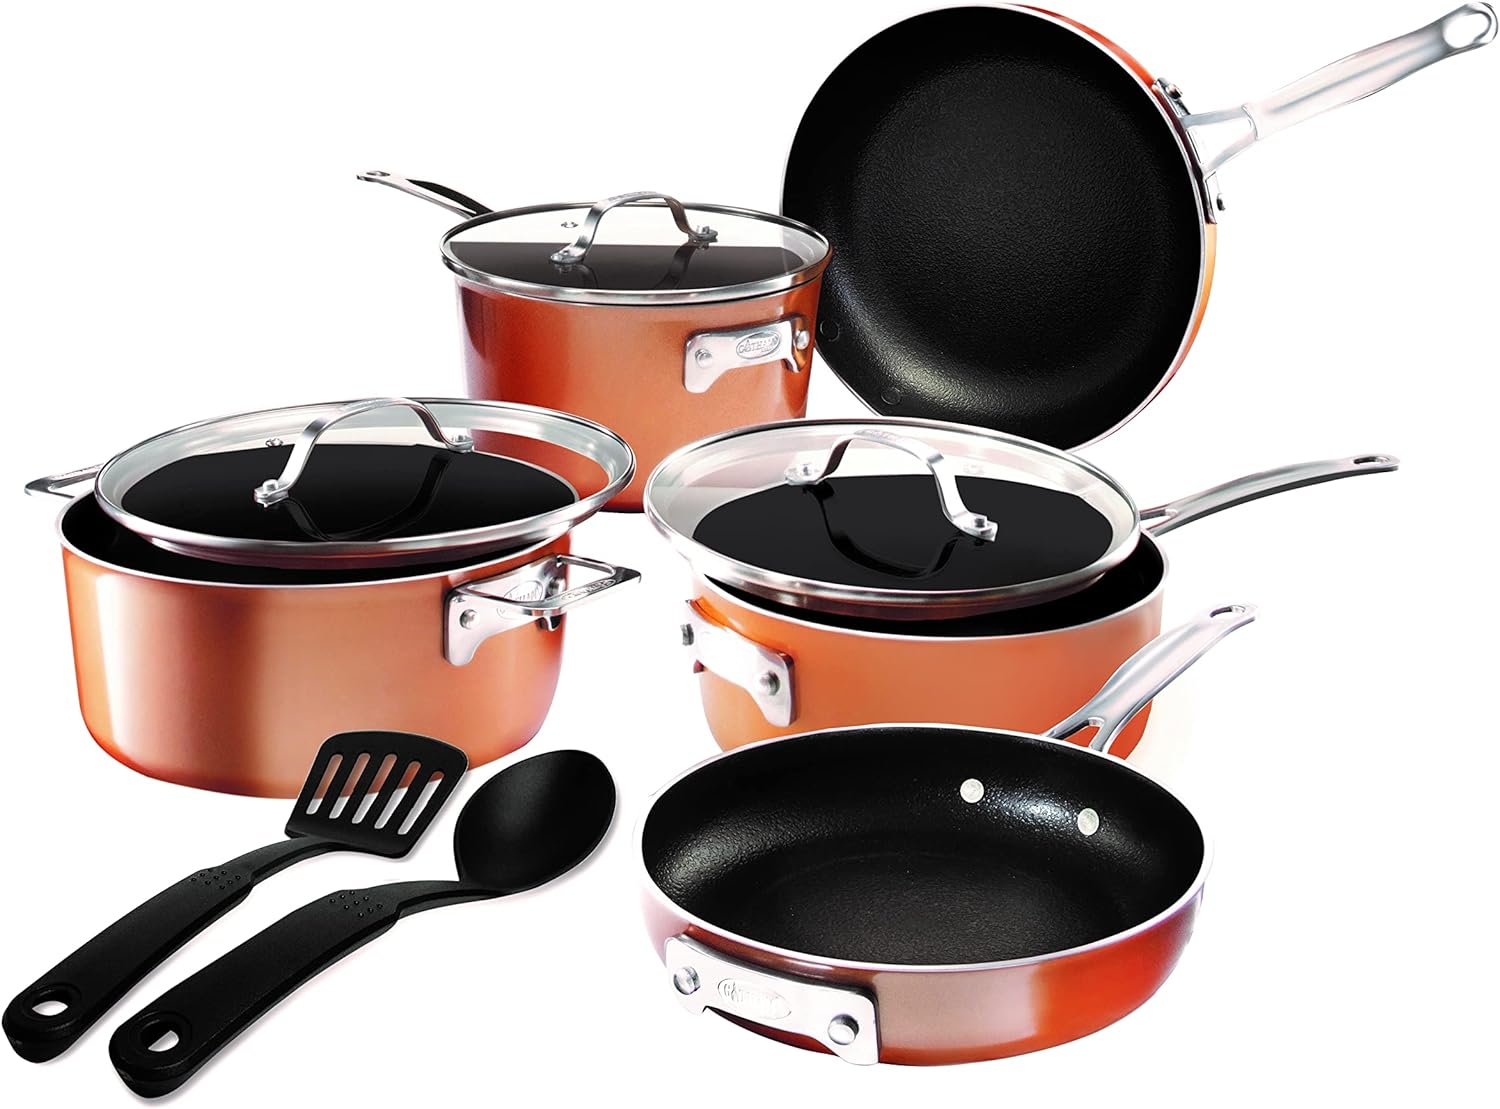 Stackable Pots and Pans Set Review